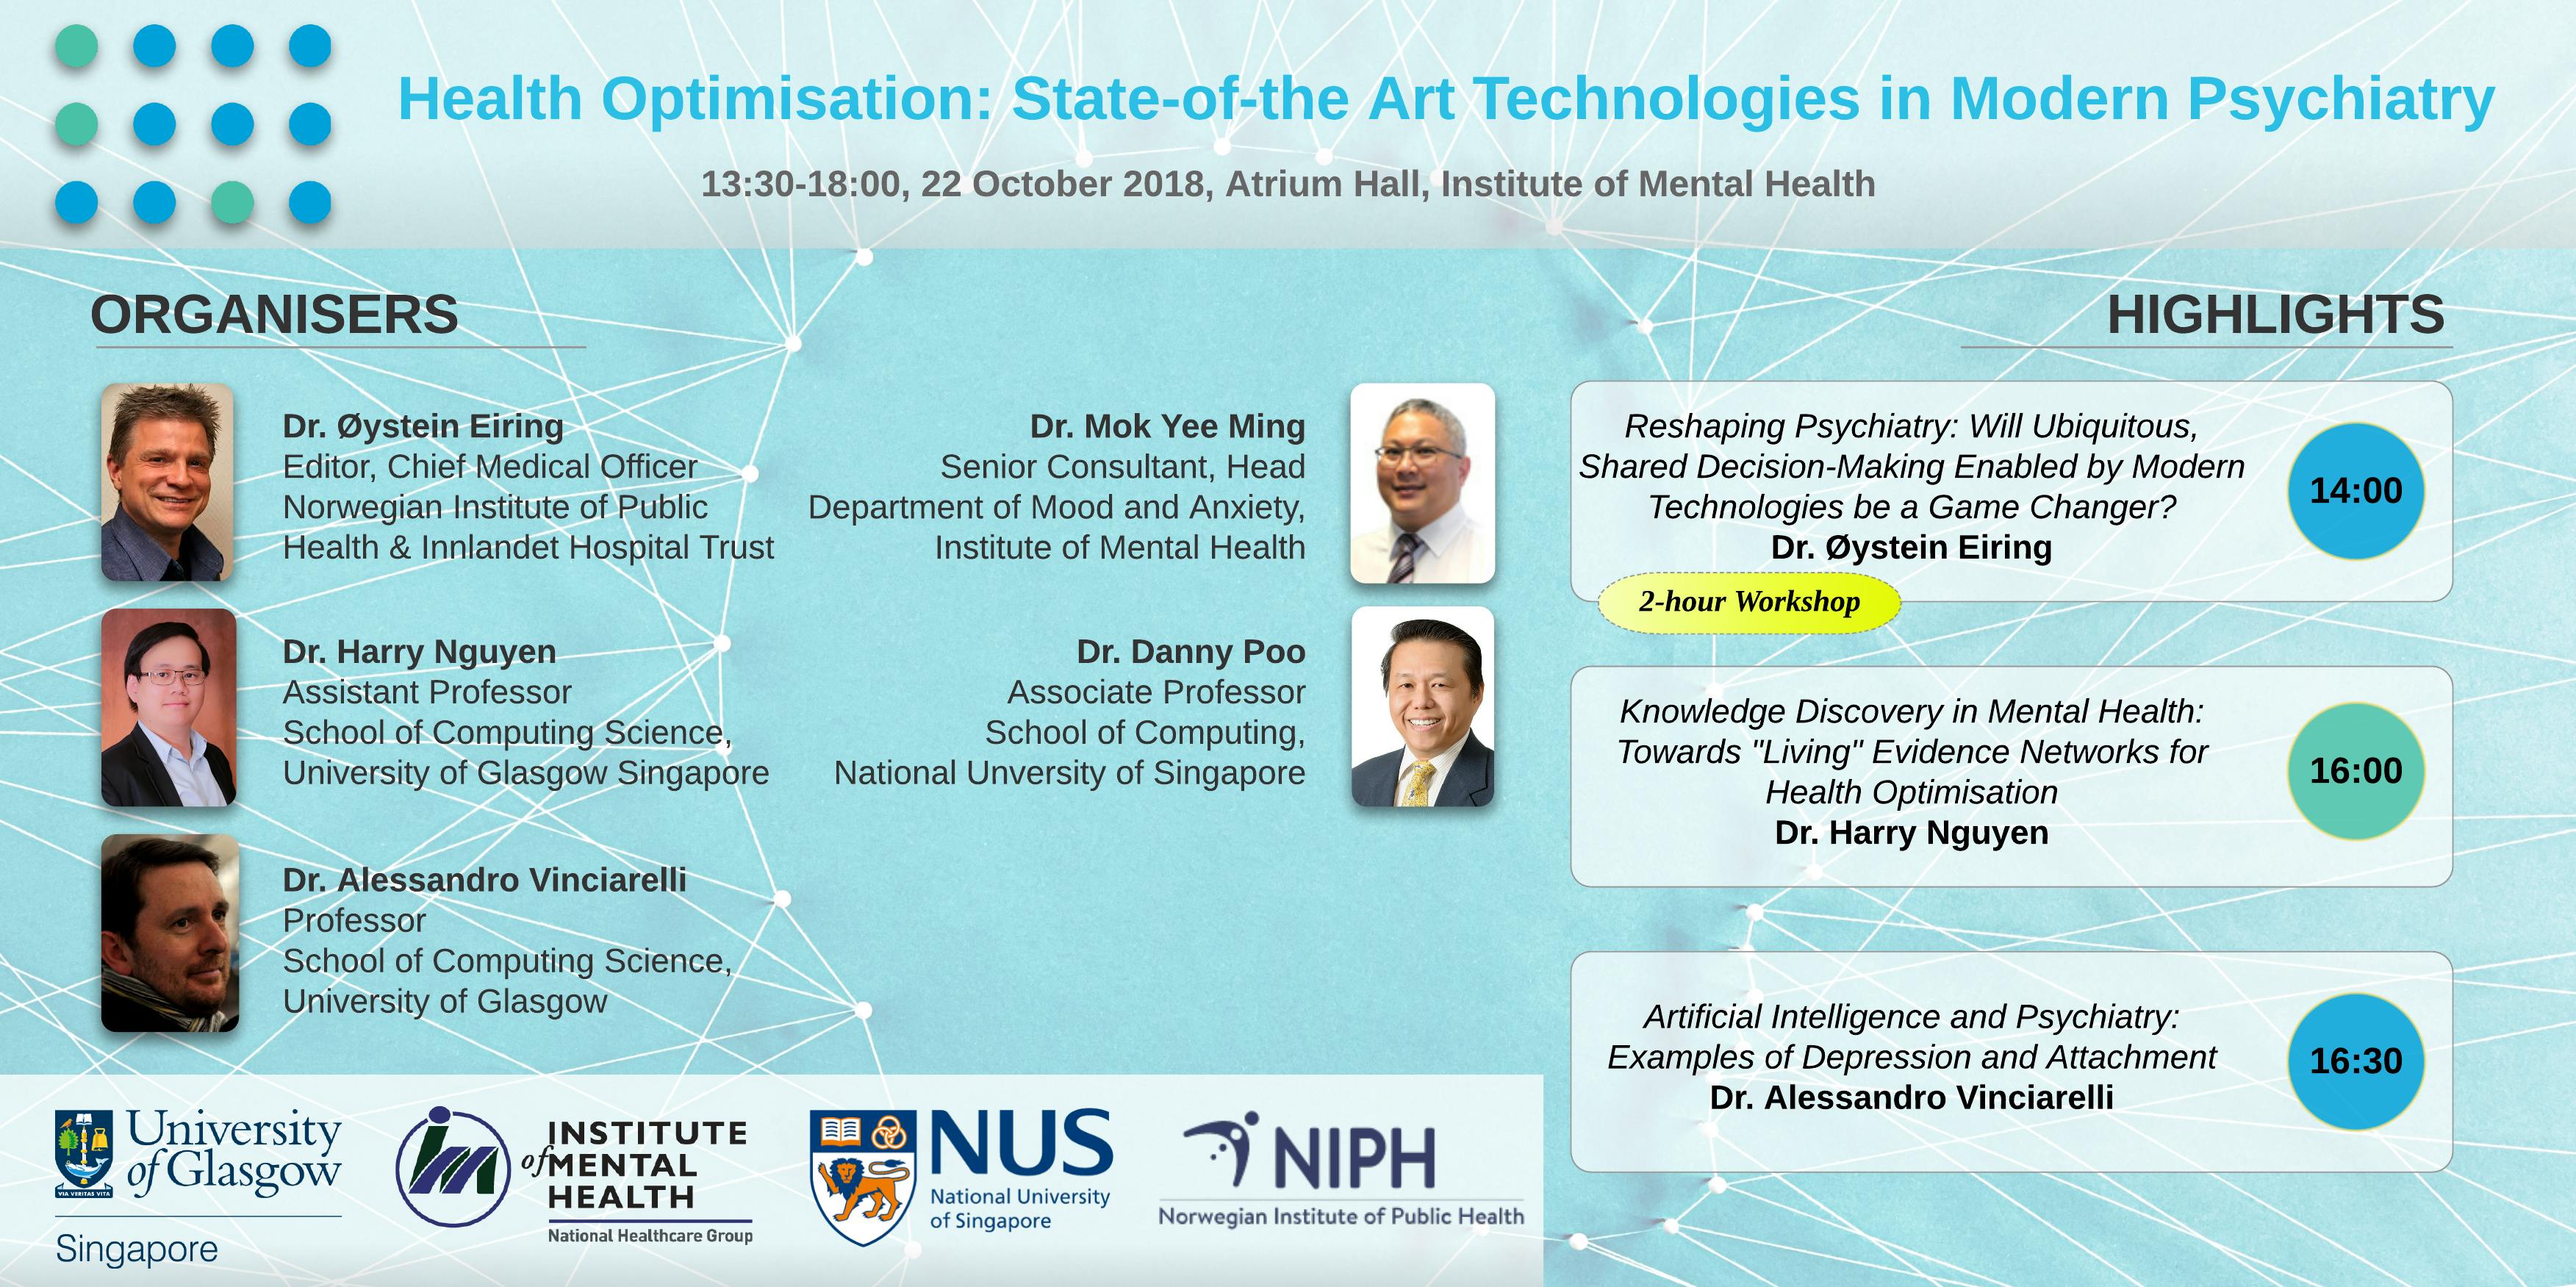 Health Optimisation: State-of-the Art Technologies in Modern Psychiatry